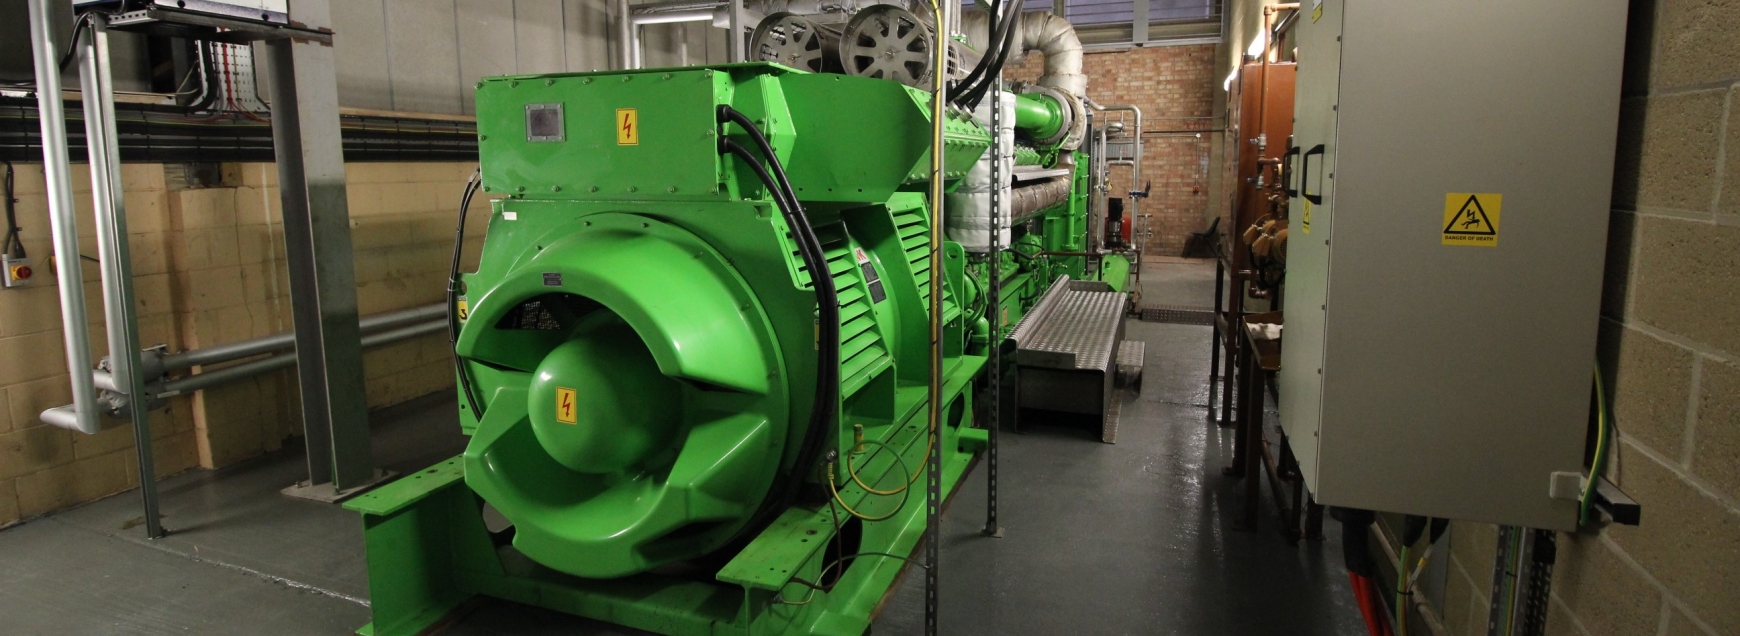 Green CHP engine in a shed